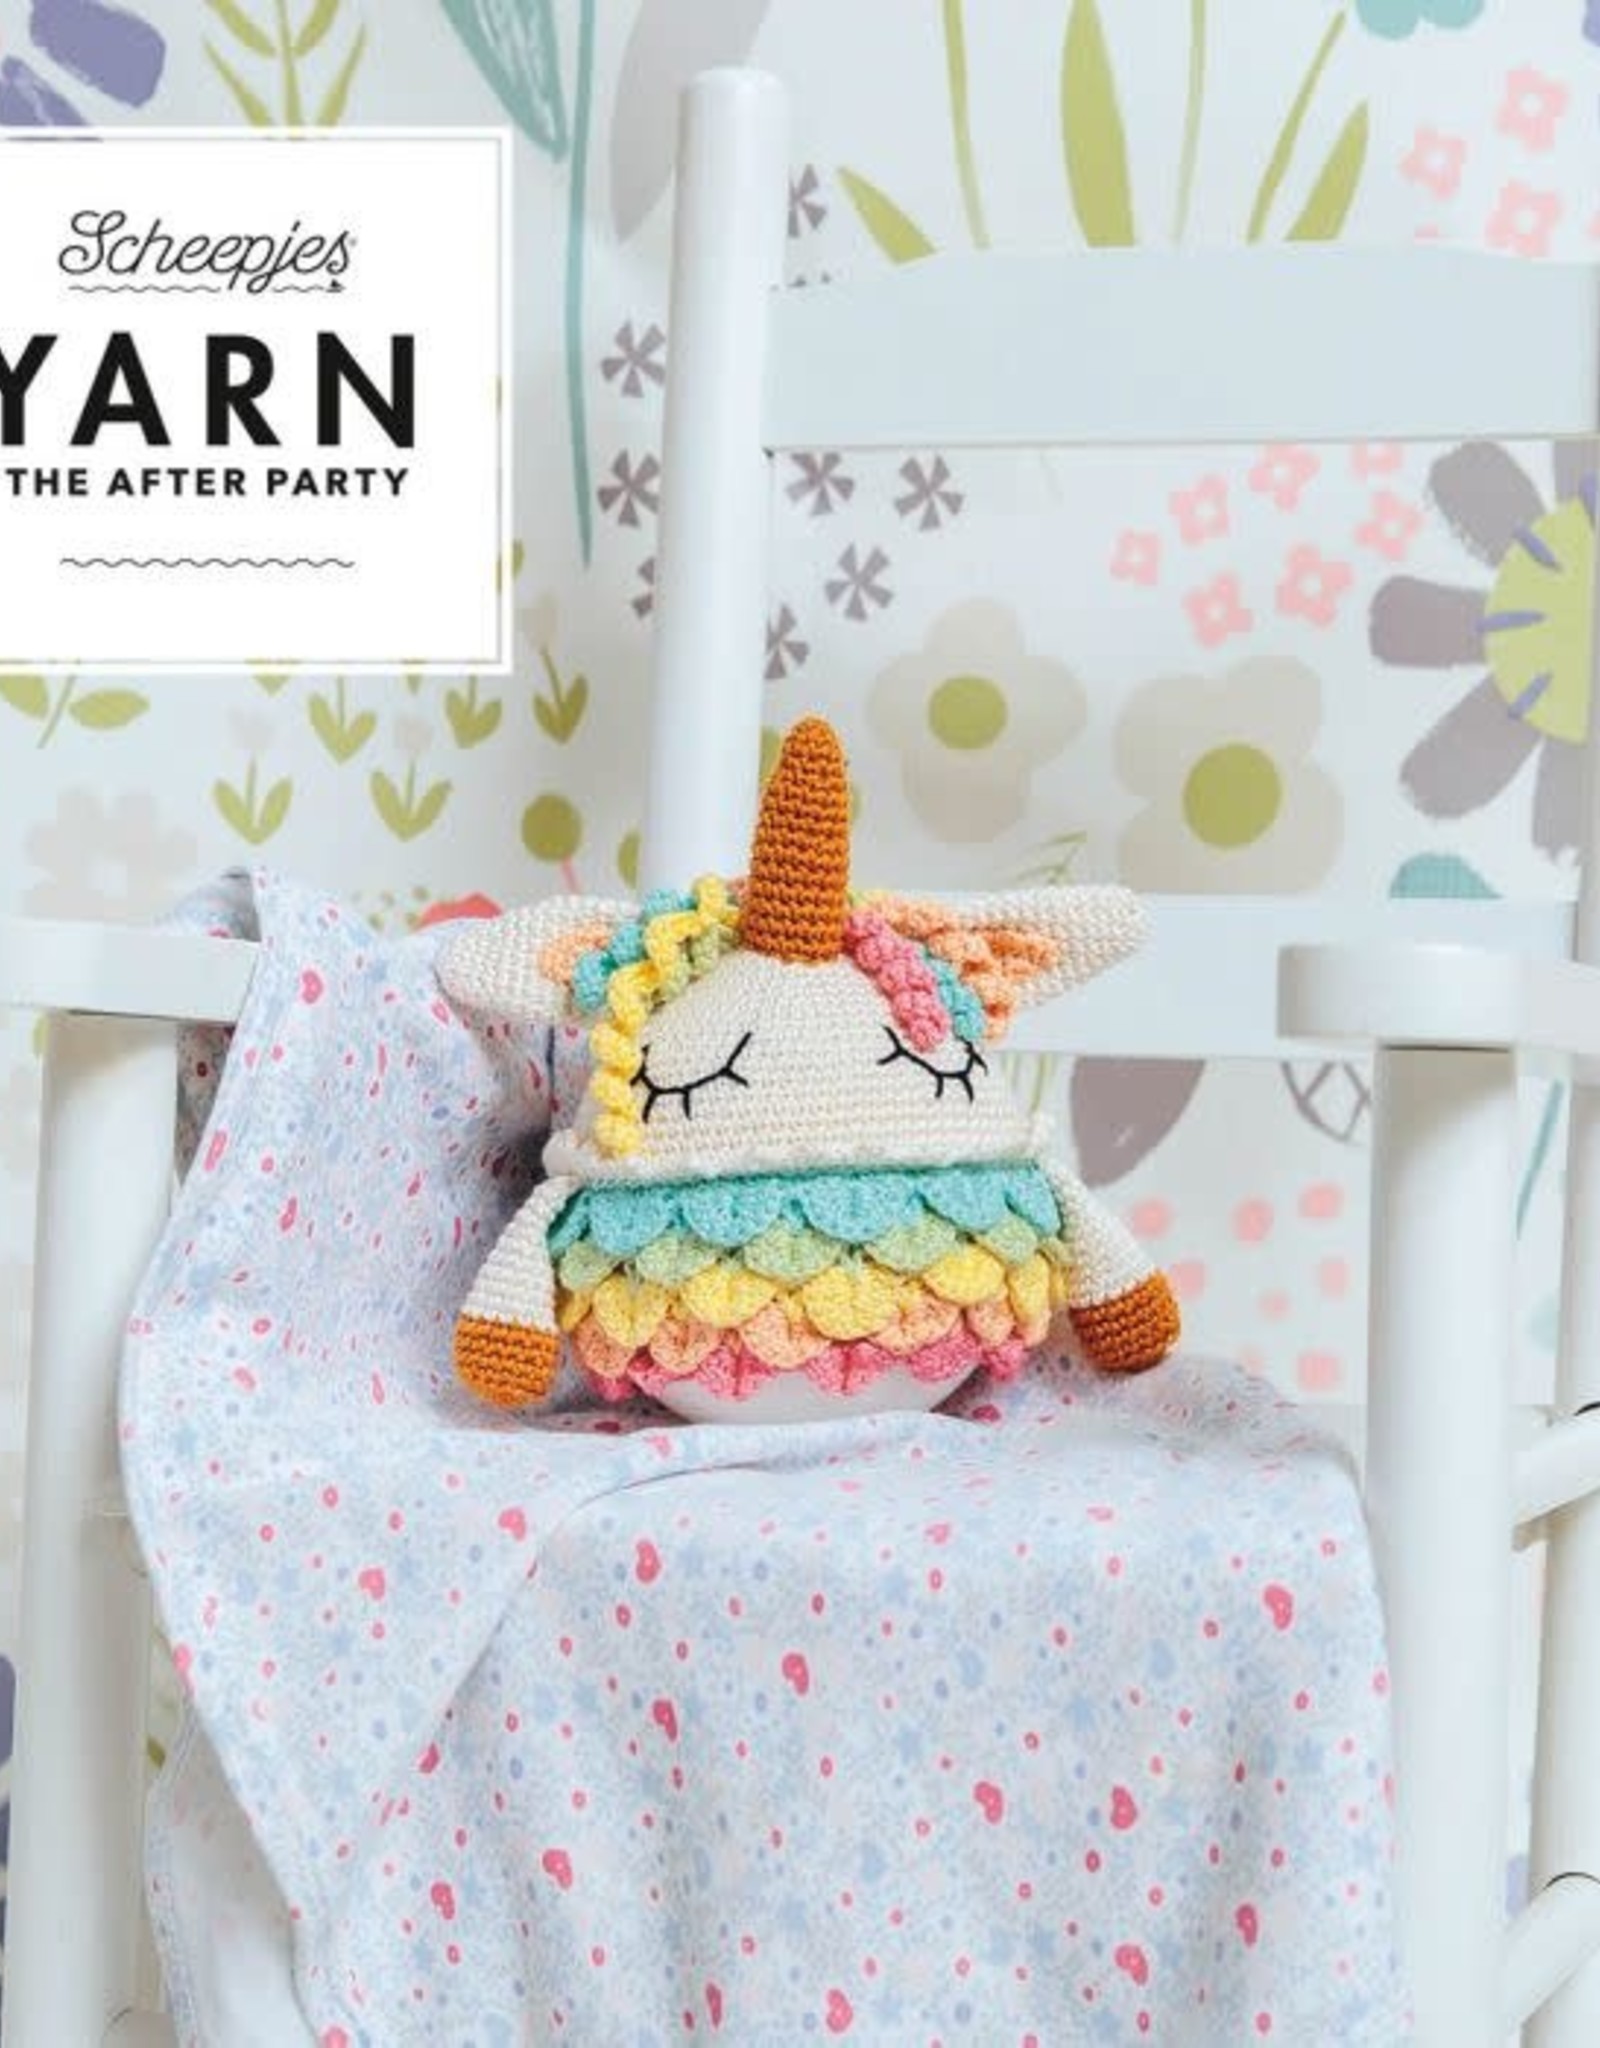 Scheepjes YARN The After Party nr 116 Florence the Unicorn